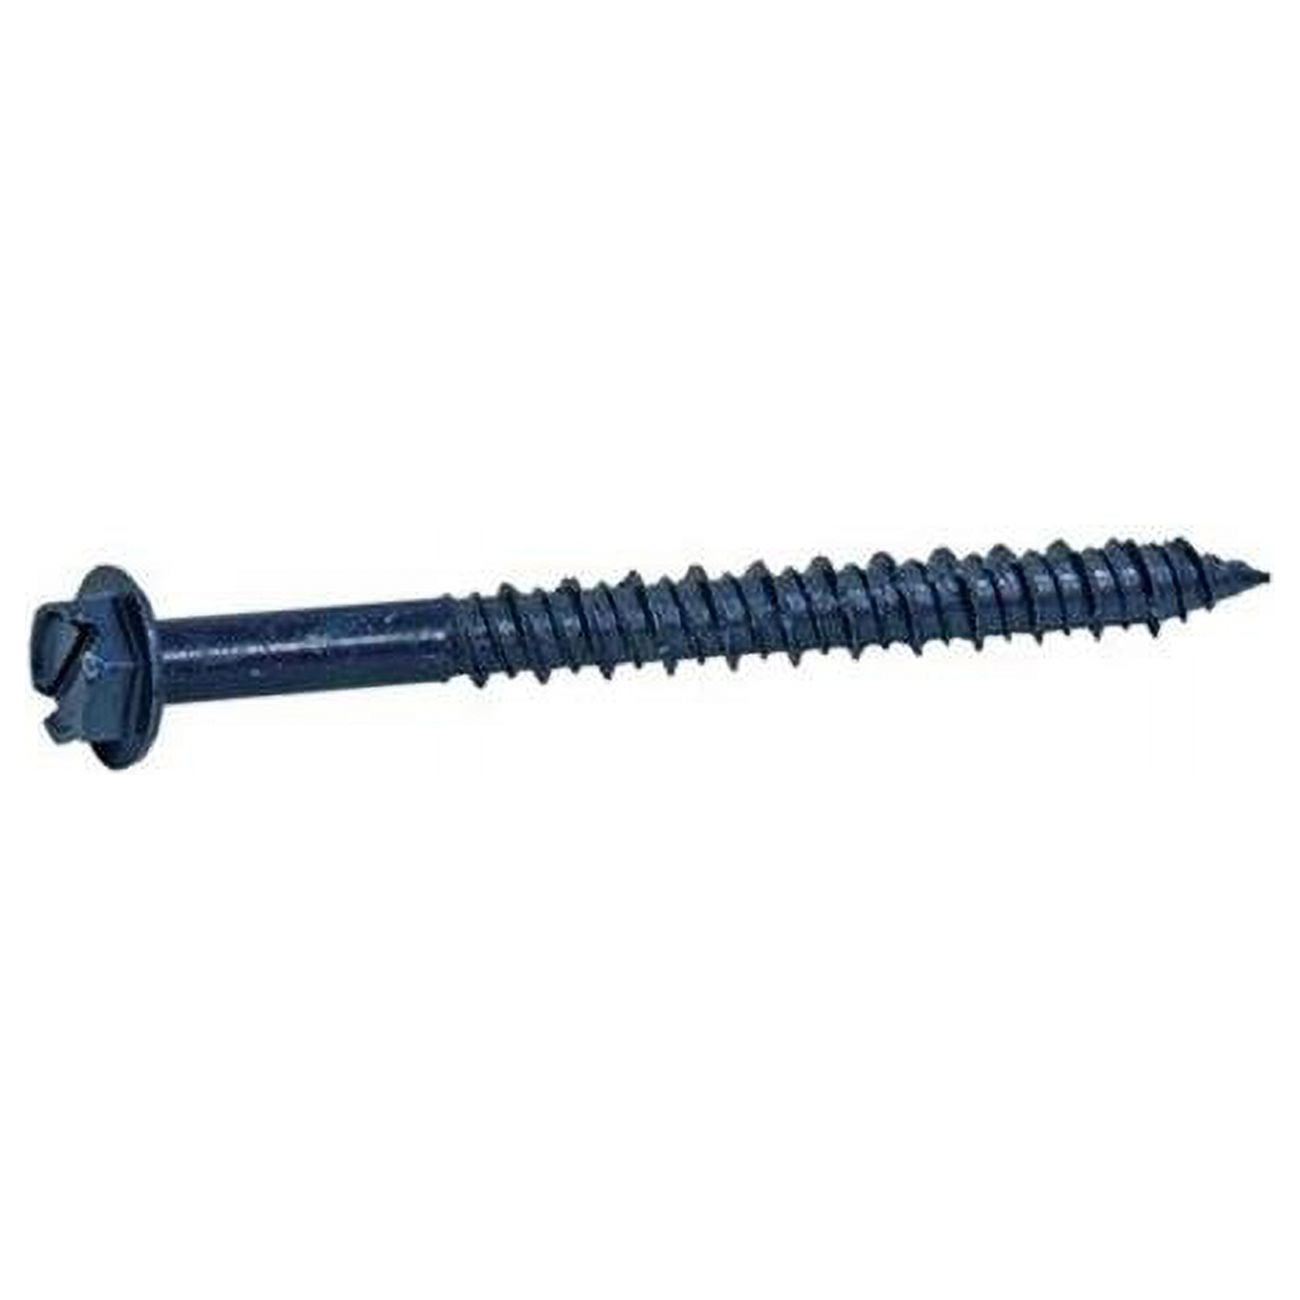 Picture of Grip-Rite 5025257 0.25 x 3.25 in. 1 lbs Hex Washer Head Steel Concrete Screws - Pack of 12